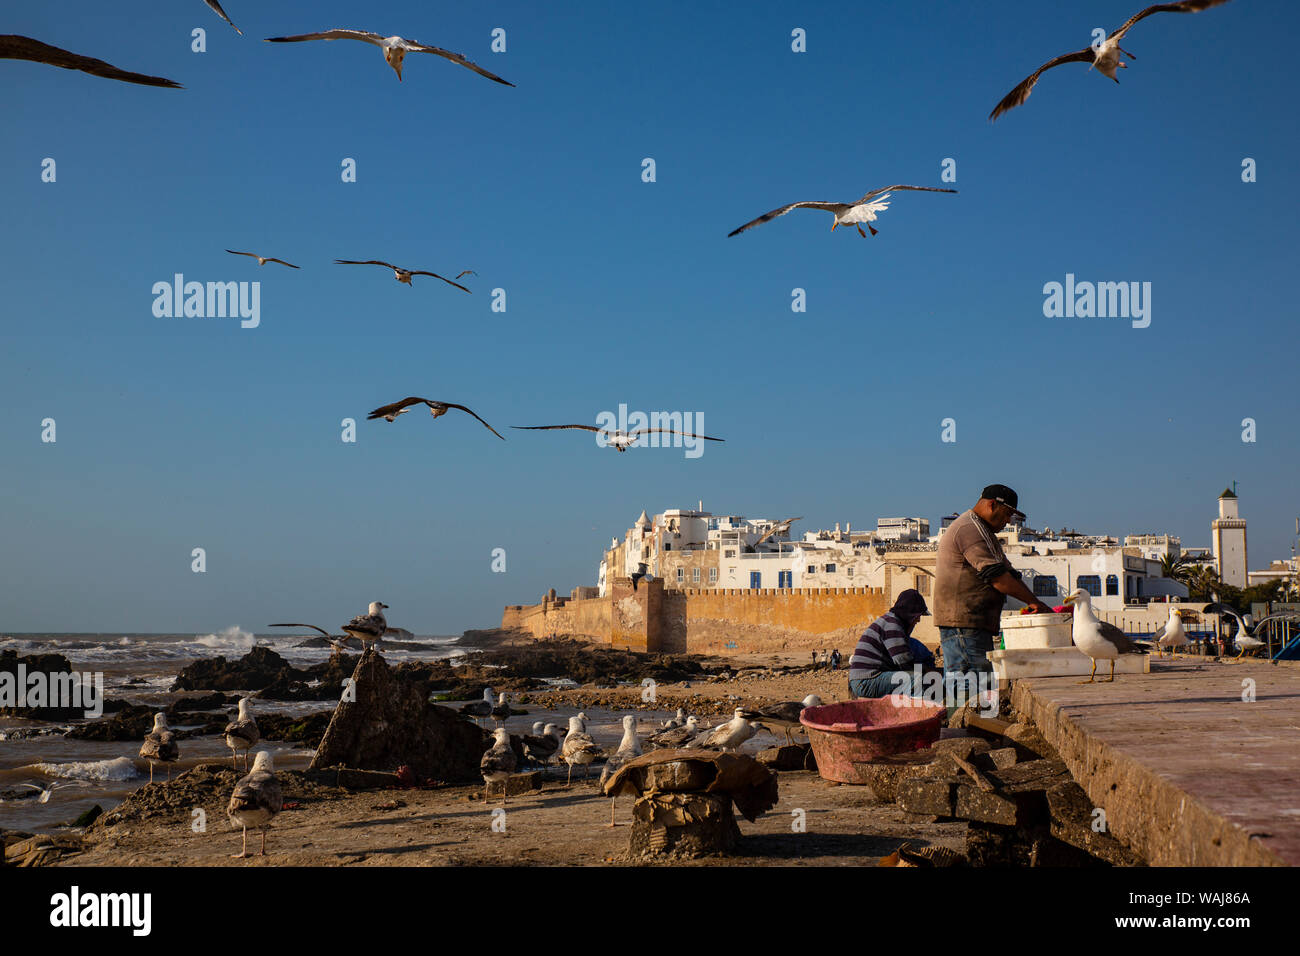 Essaouira, Morocco. Seagulls flying over fisherman cleaning fish Stock Photo